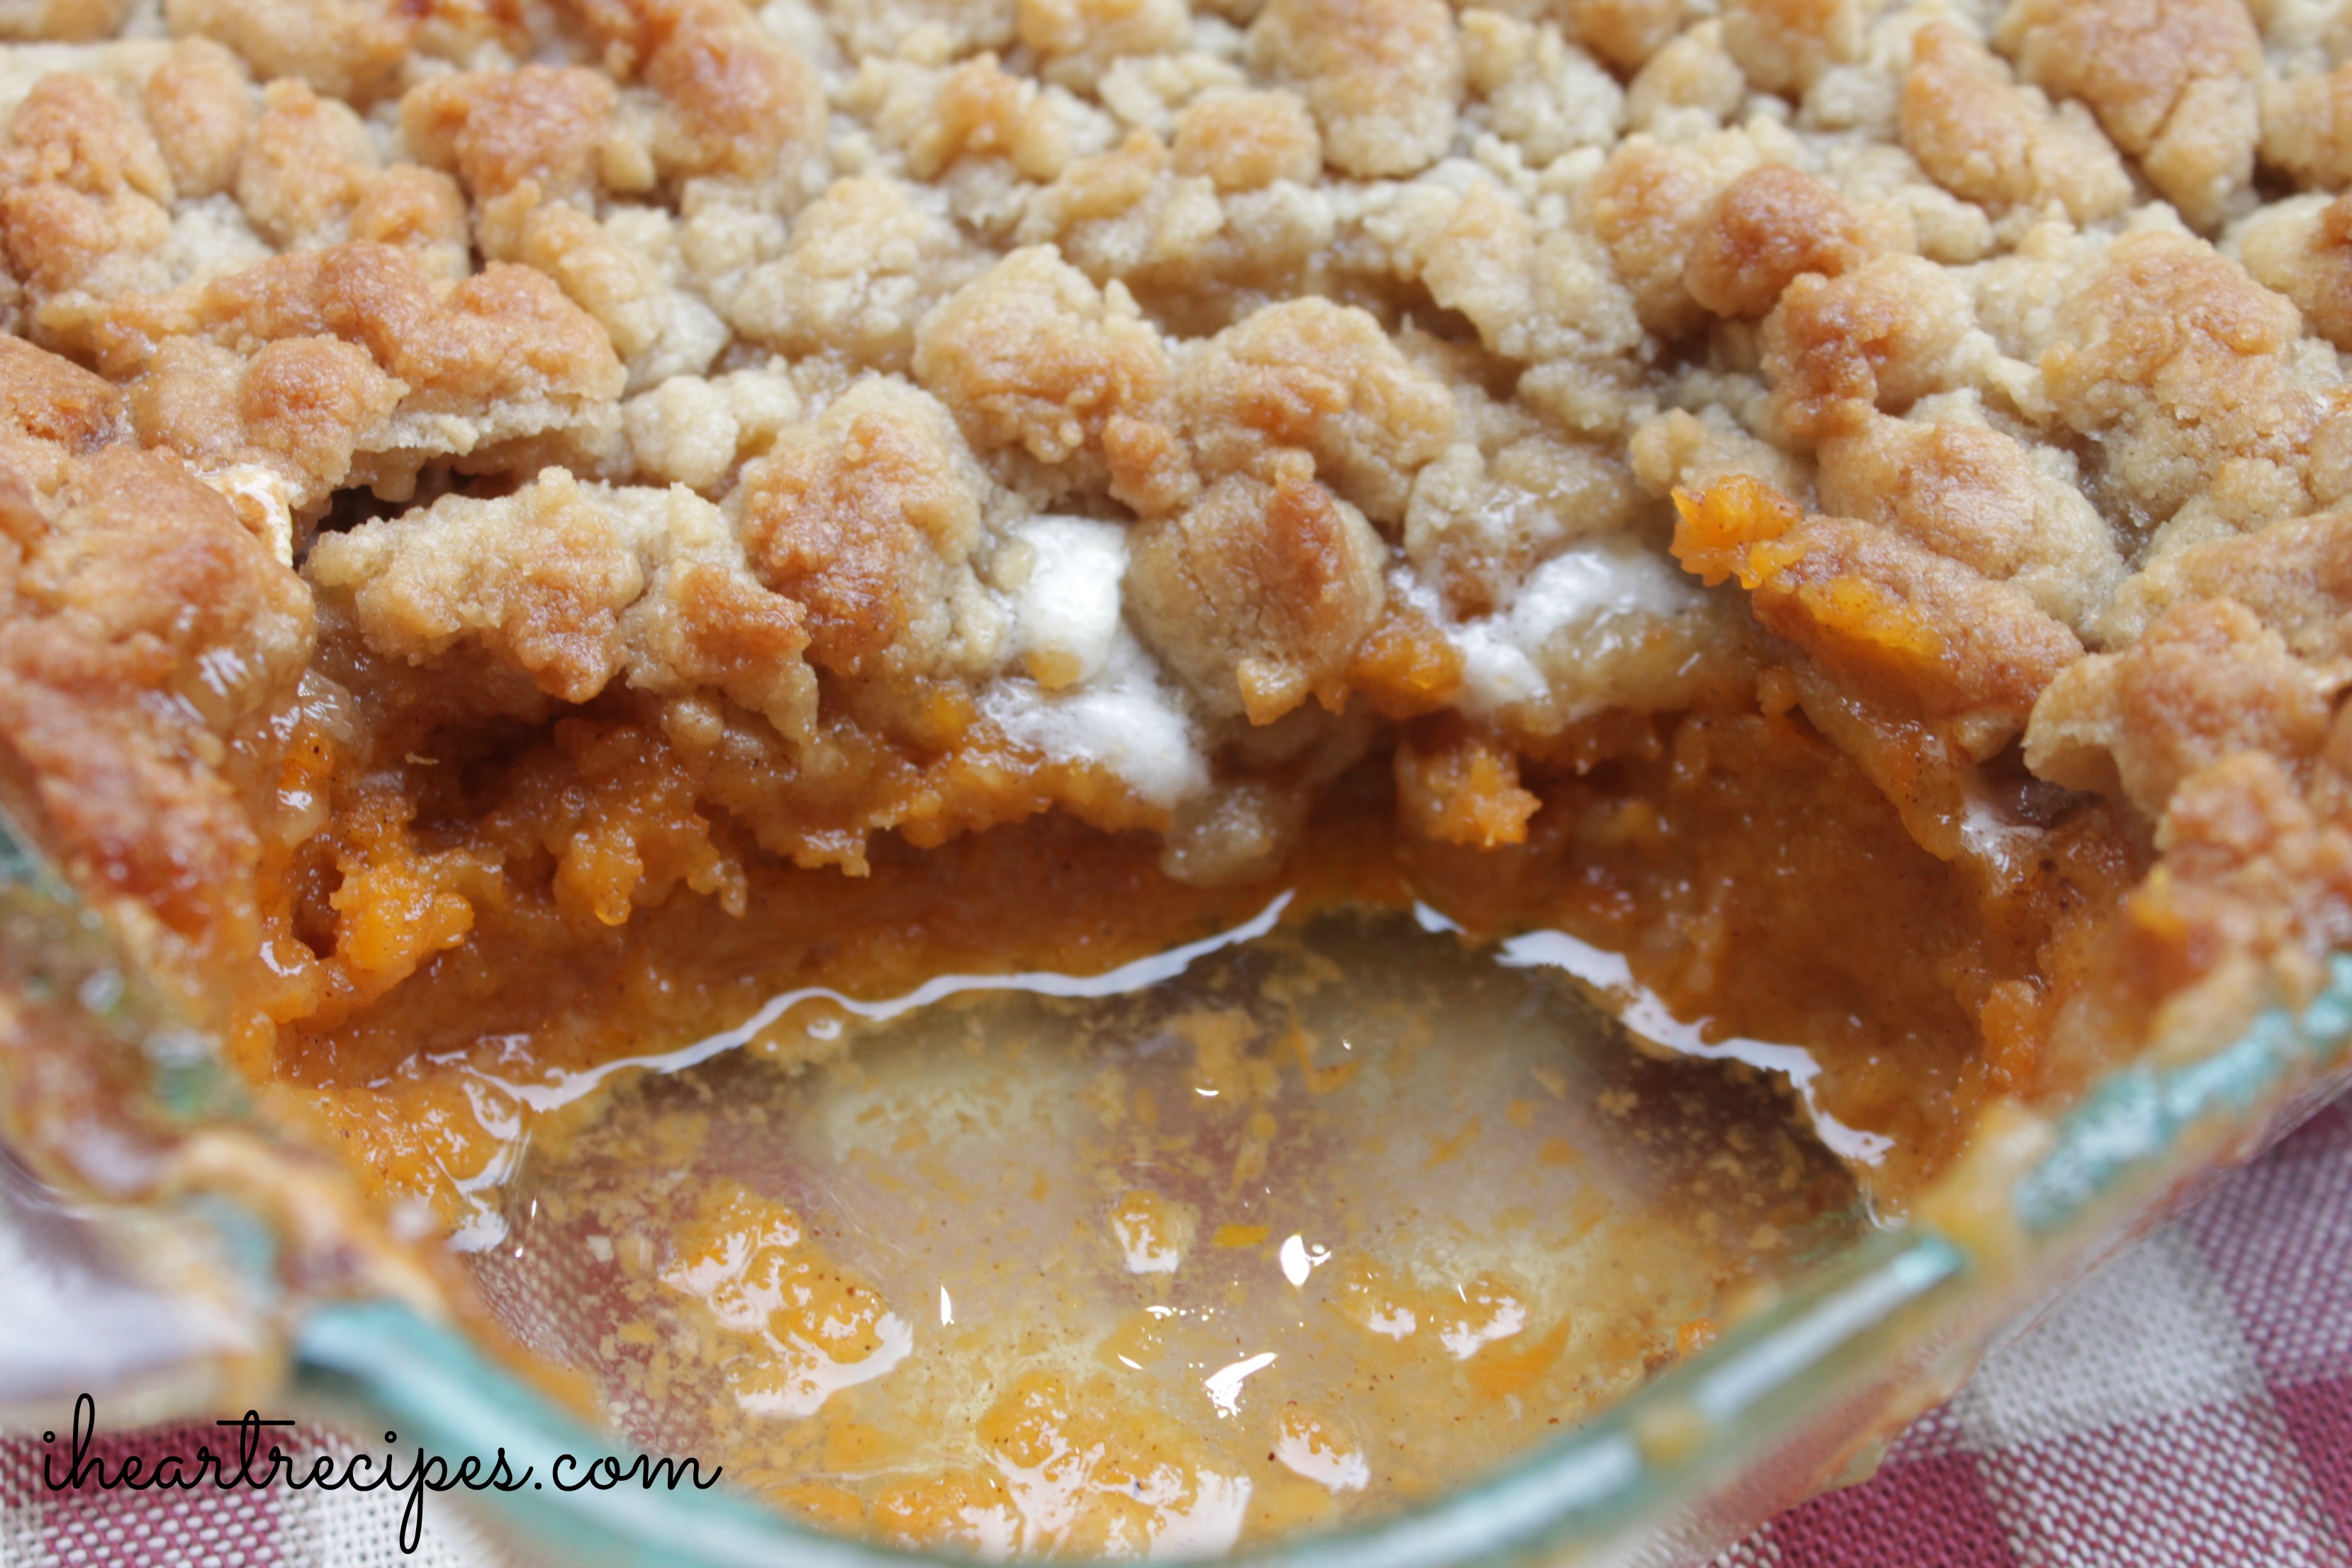 This Sweet Potato Casserole will be a holiday favorite!